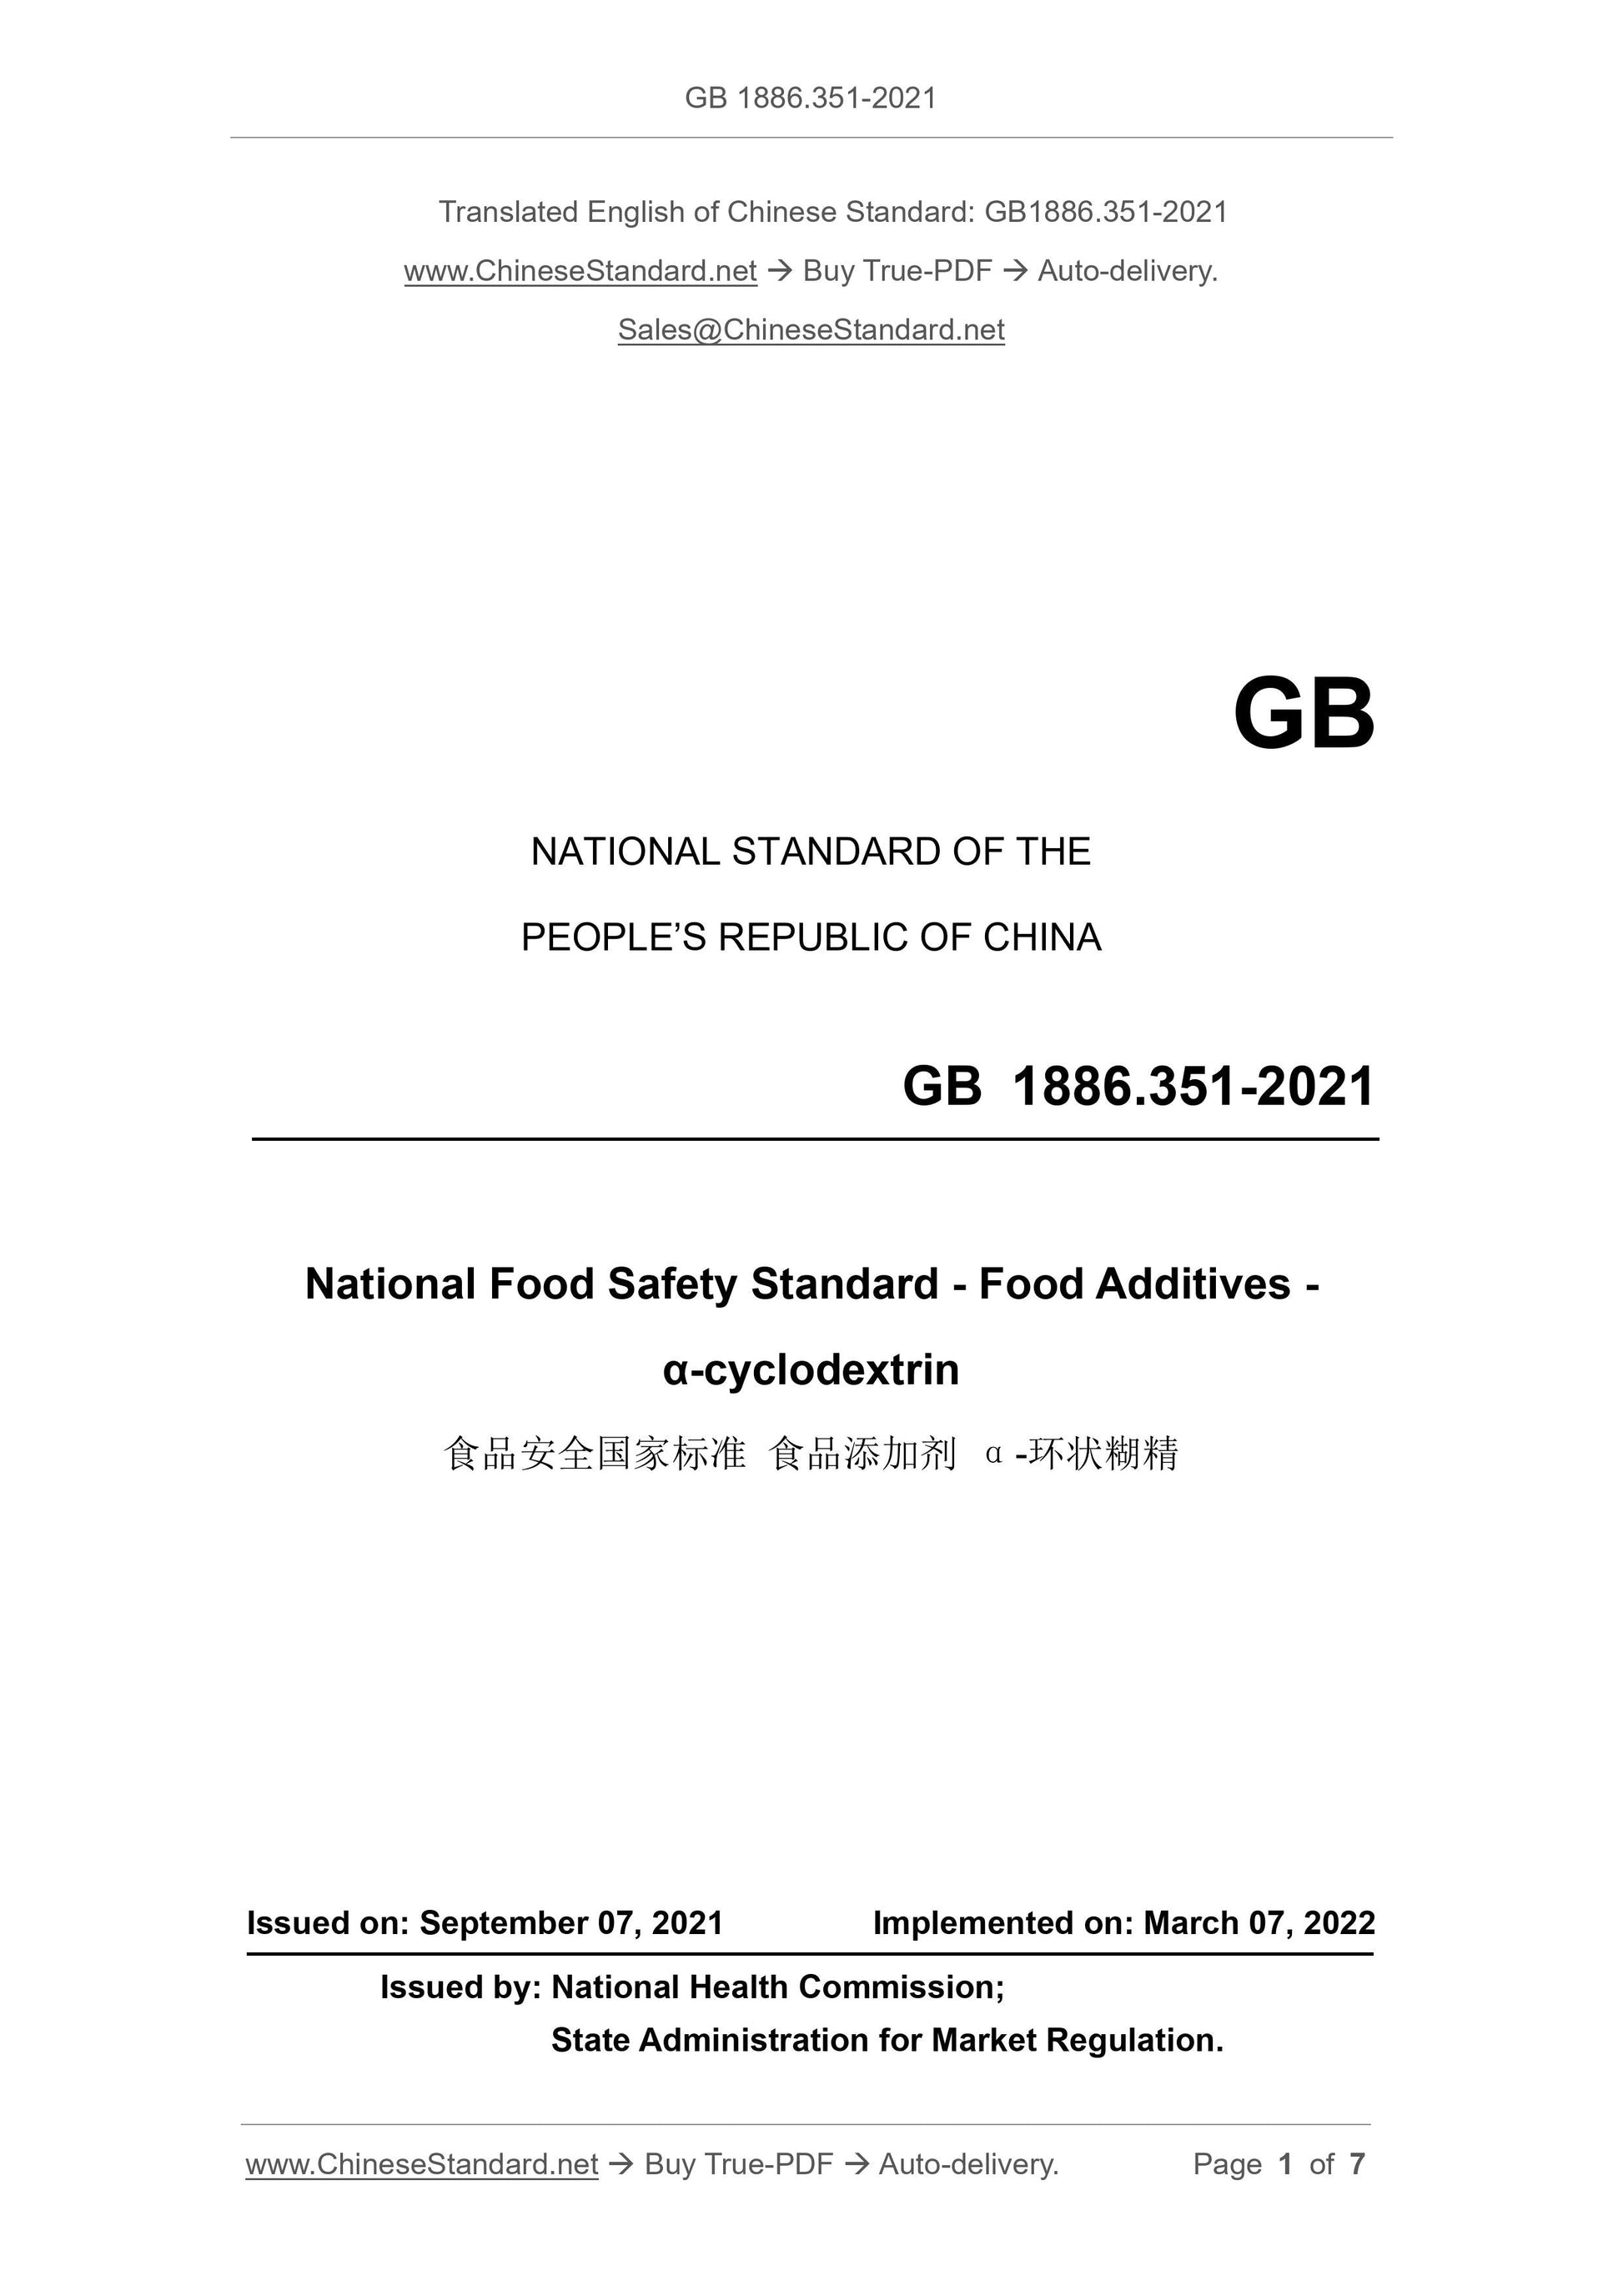 GB 1886.351-2021 Page 1